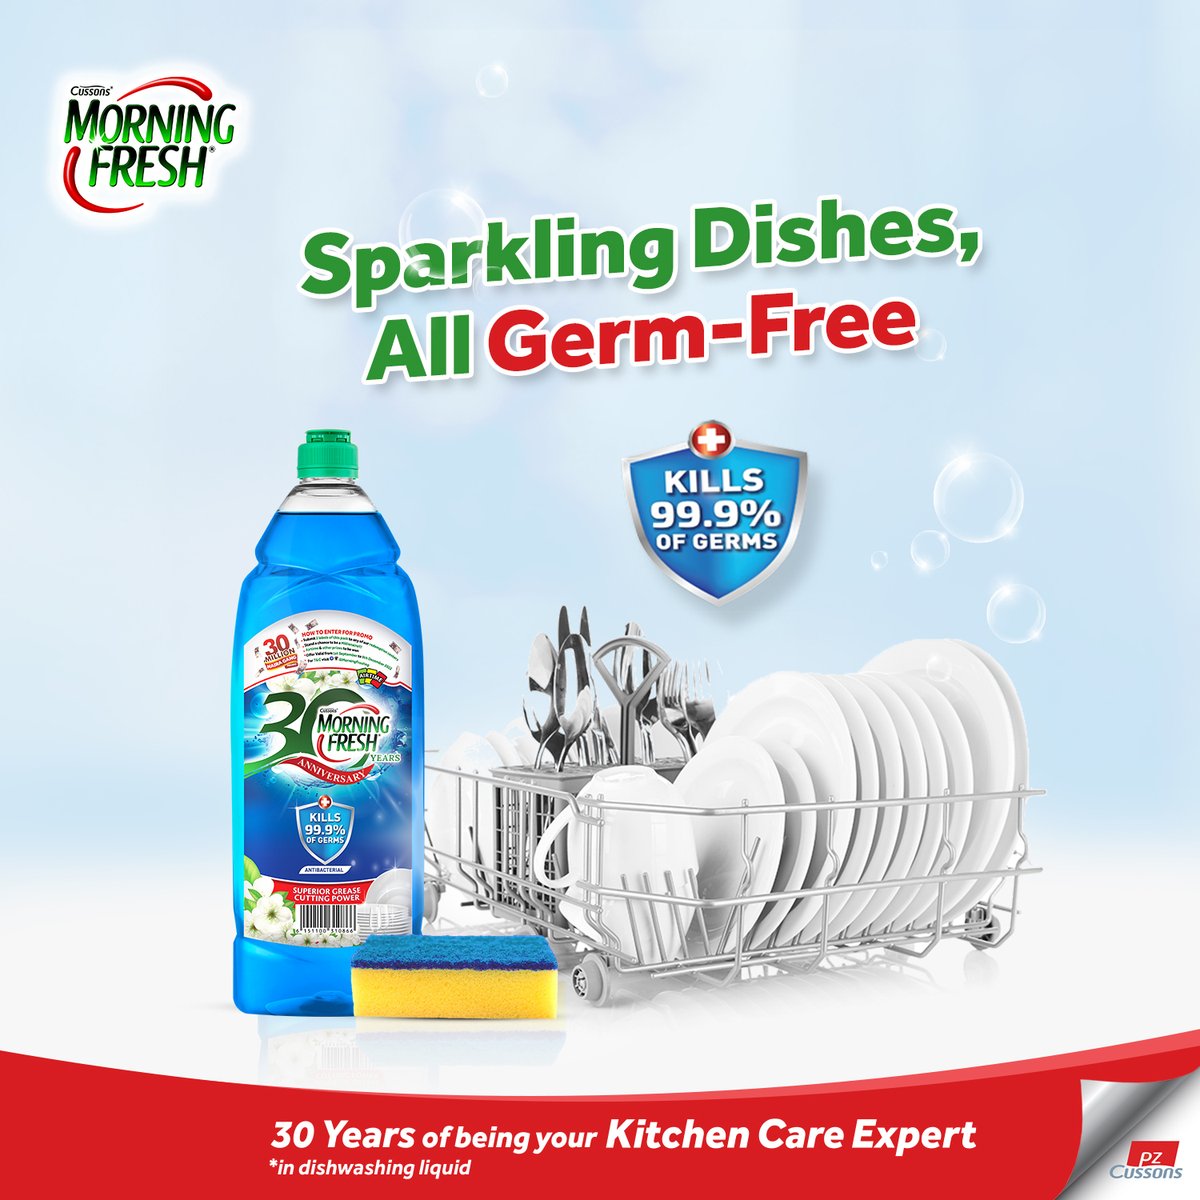 Keep the germs off; get the shine on; this should be your kitchen mantra in 2023.

Trust Morning Fresh Antibac, to get this tough job done.
#CaringFortheCaregiver #KitchenCareExpert #MorningFreshis30 #PowerInOneDrop